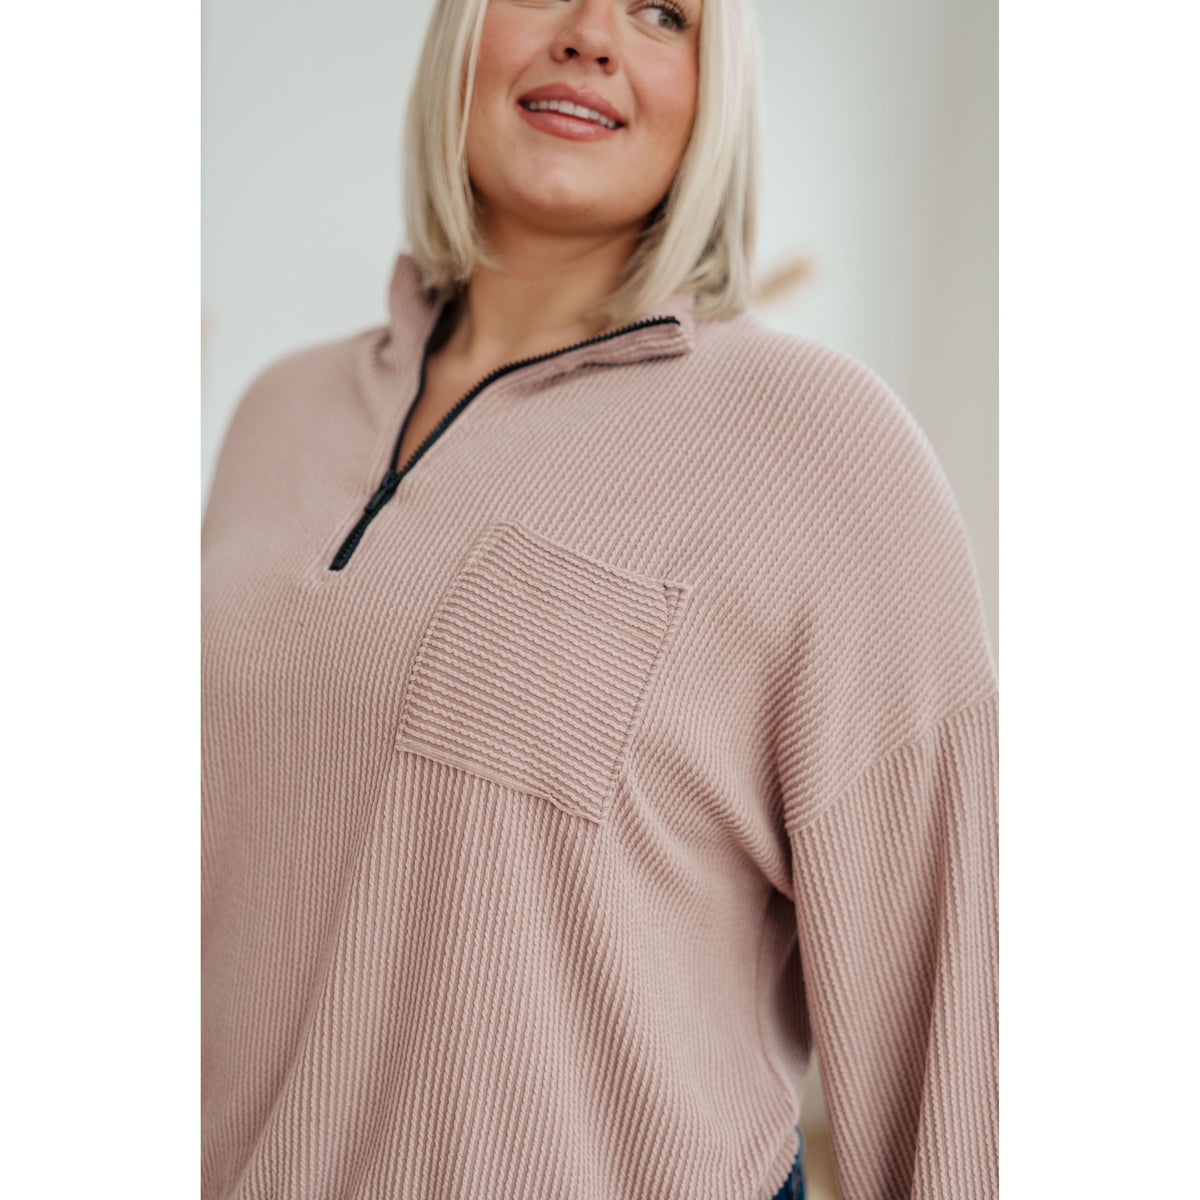 White Birch | Women’s Up for Discussion Half Zip Pullover